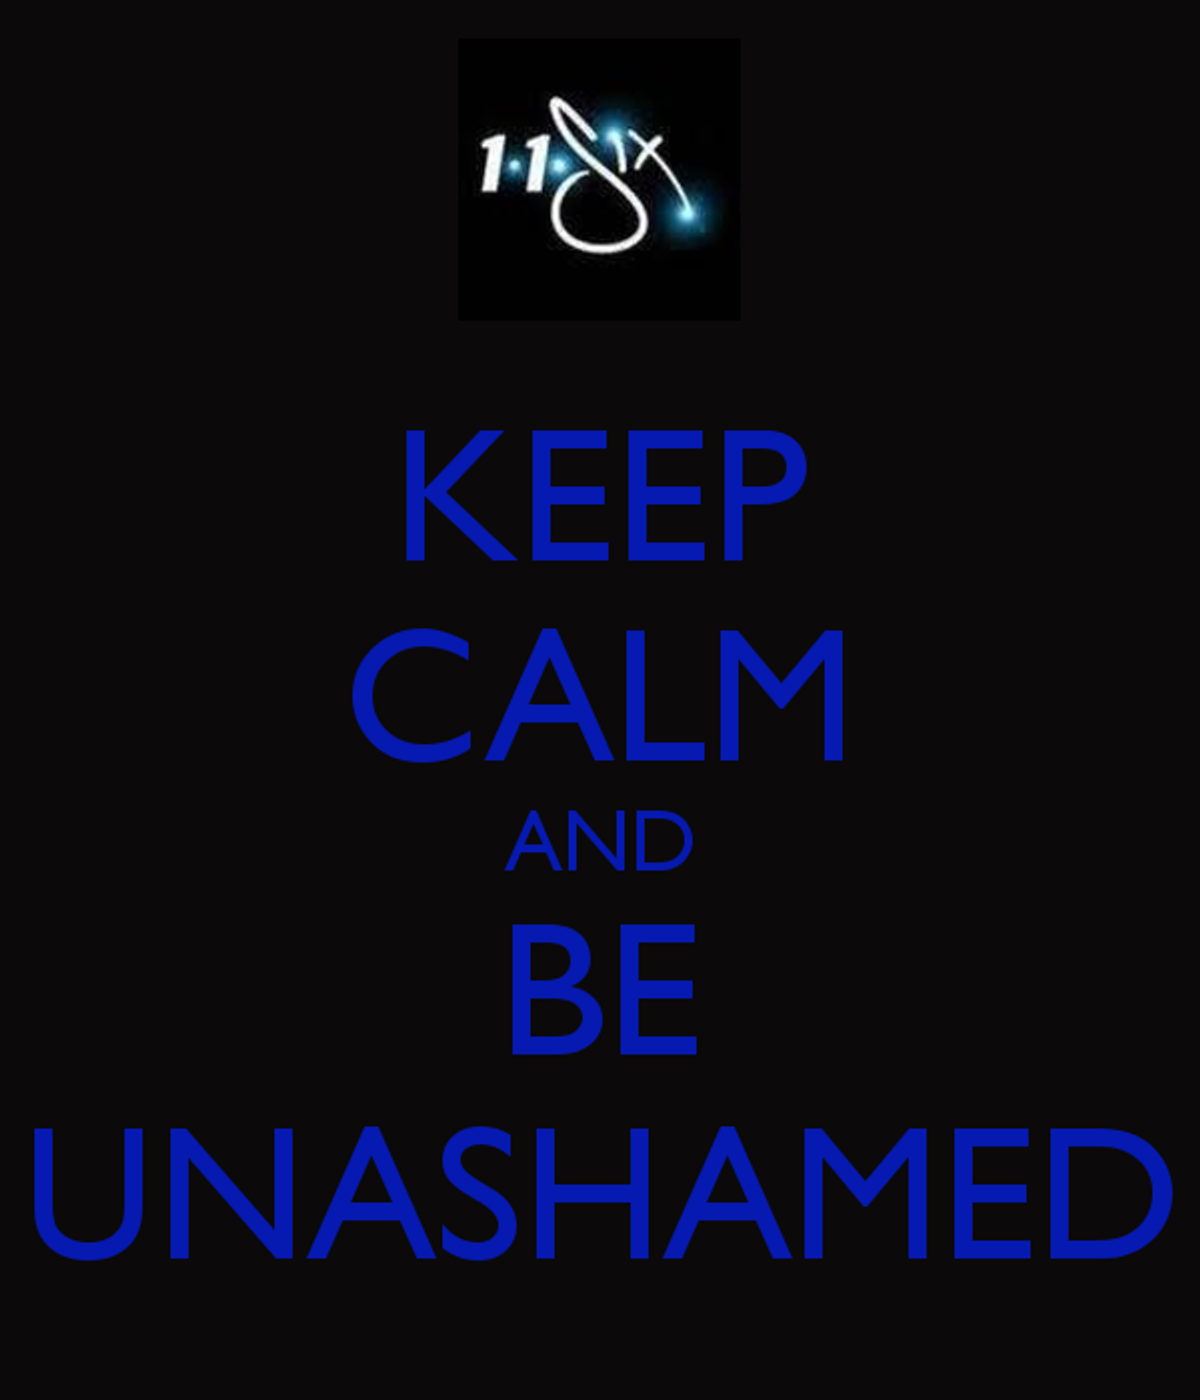 Unchained And Unashamed